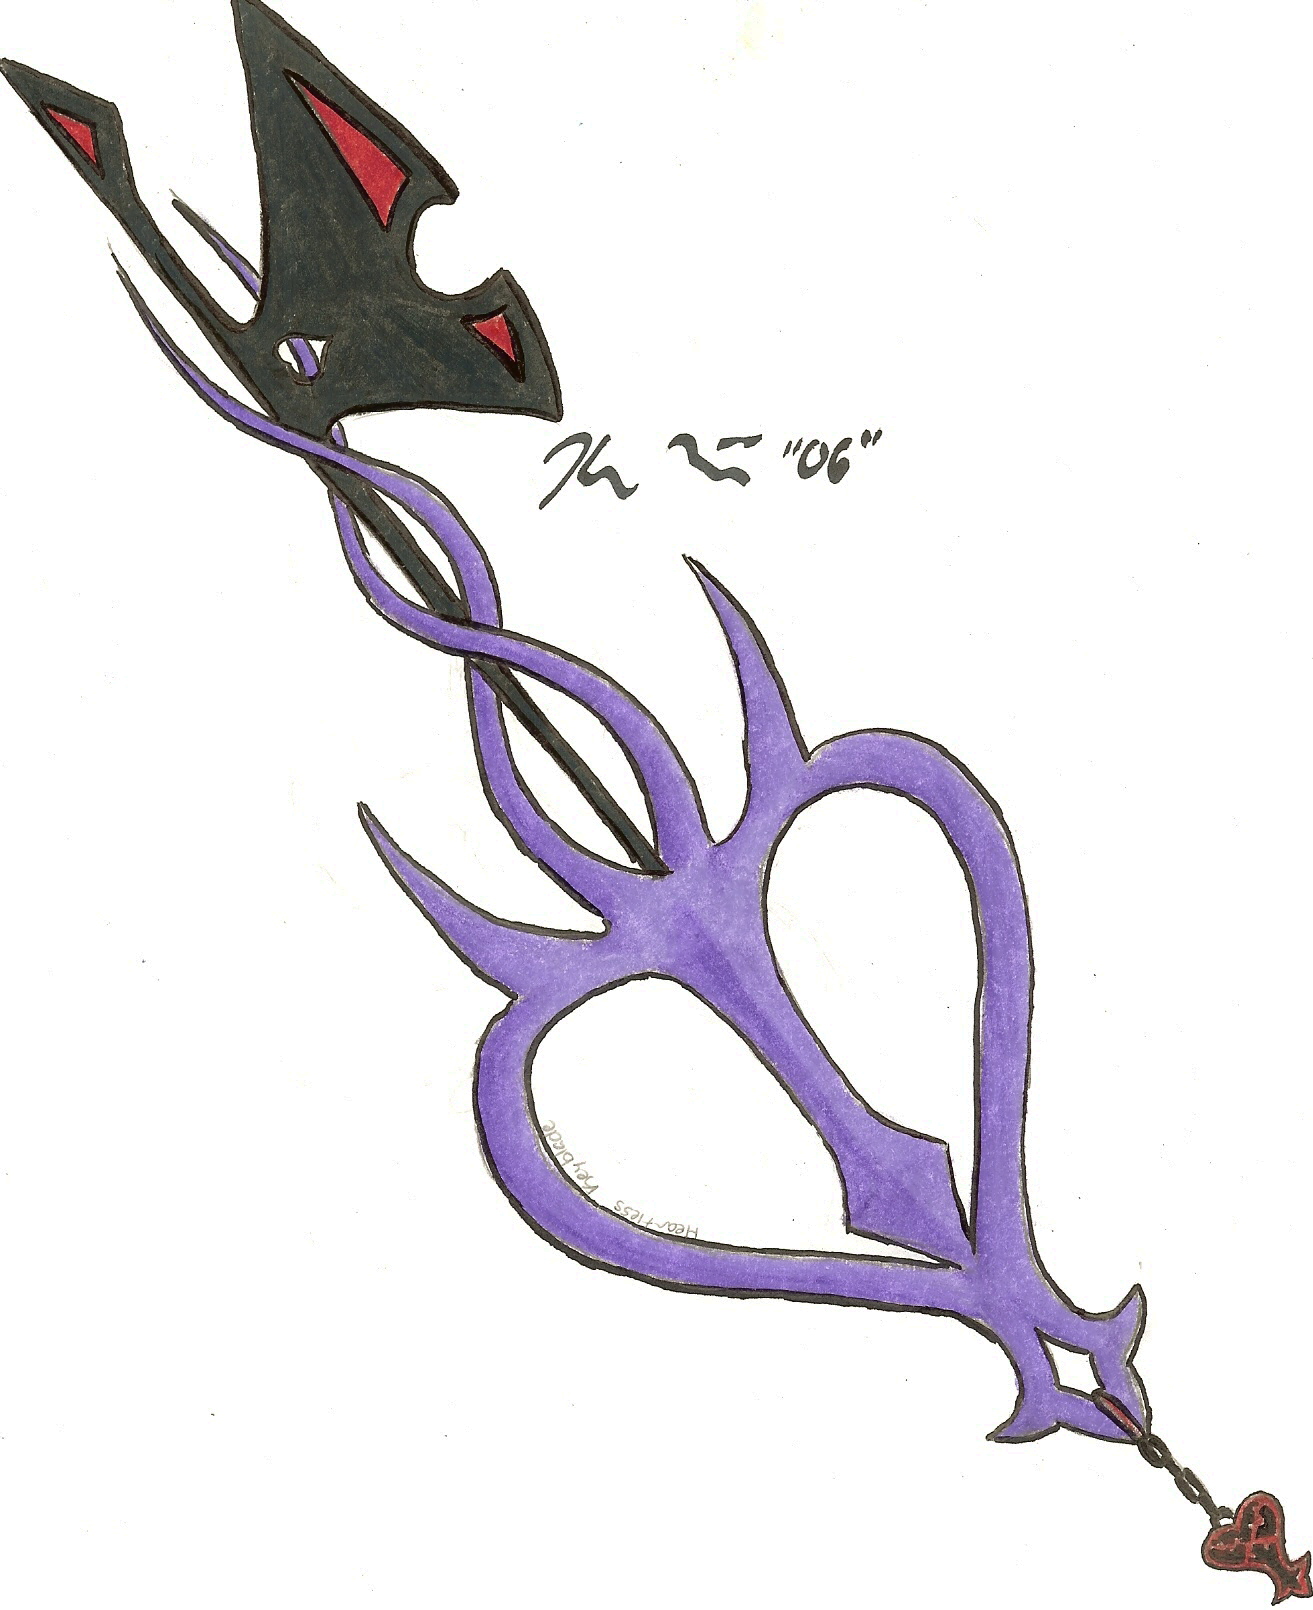 Heartless Keyblade by Dasher